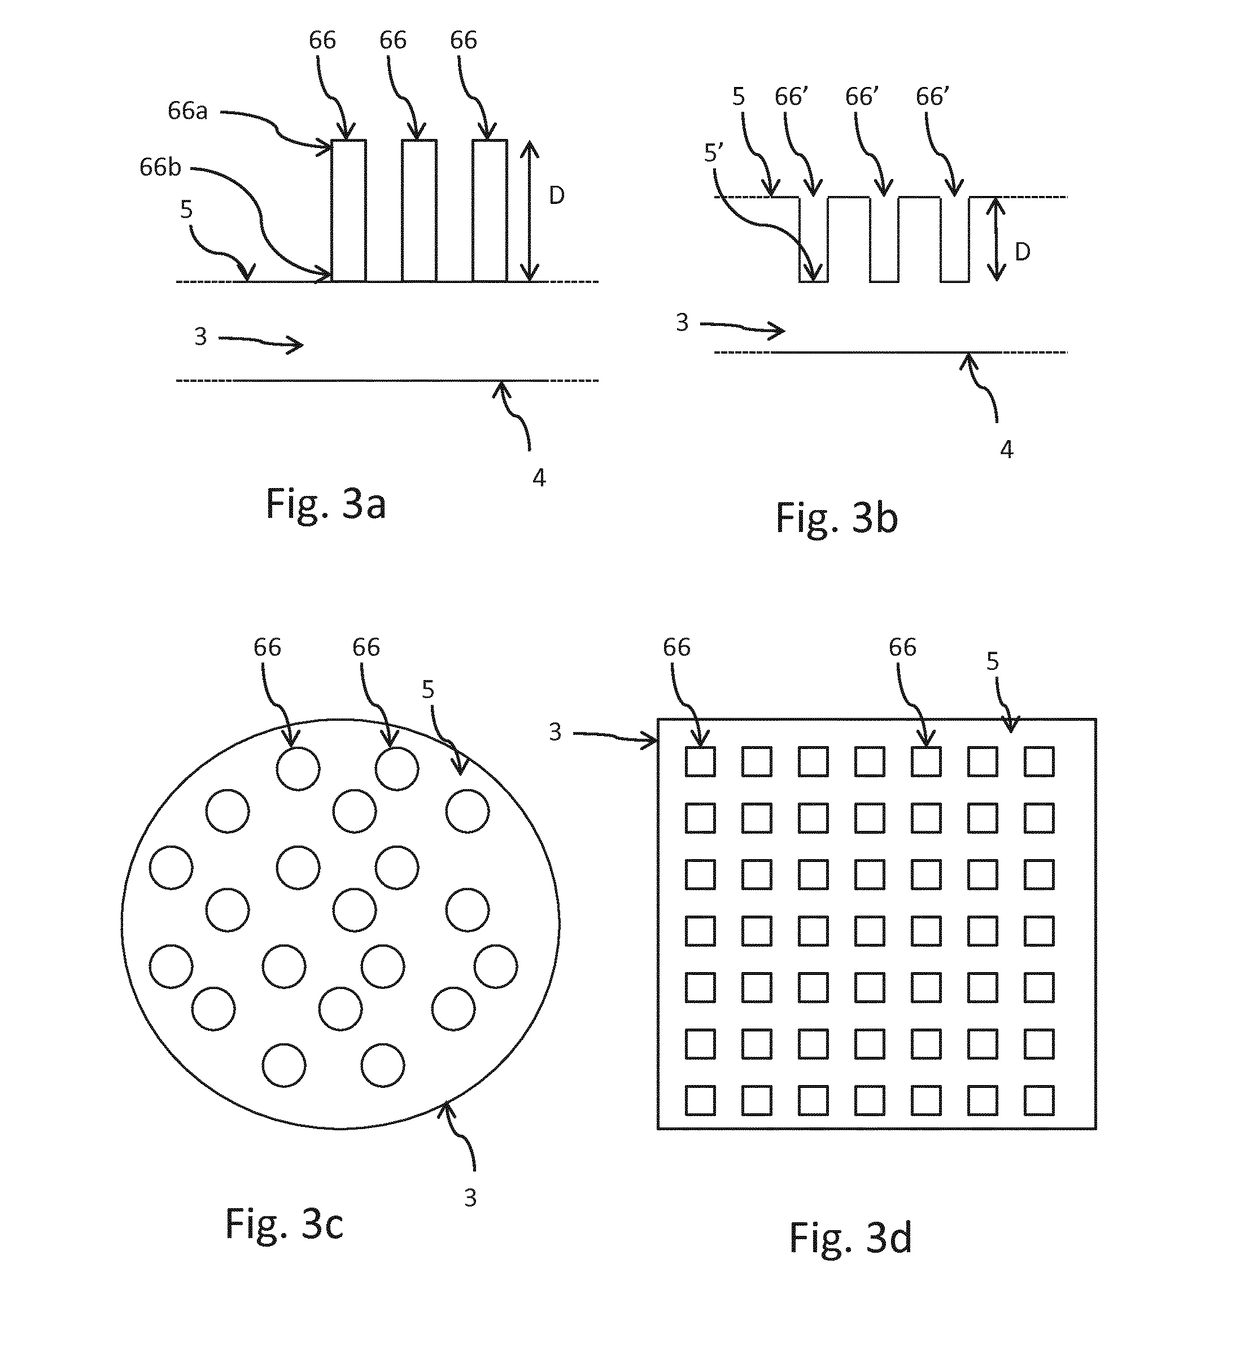 Light converting device having a wavelength converting layer with a hydrophobic nanostructure